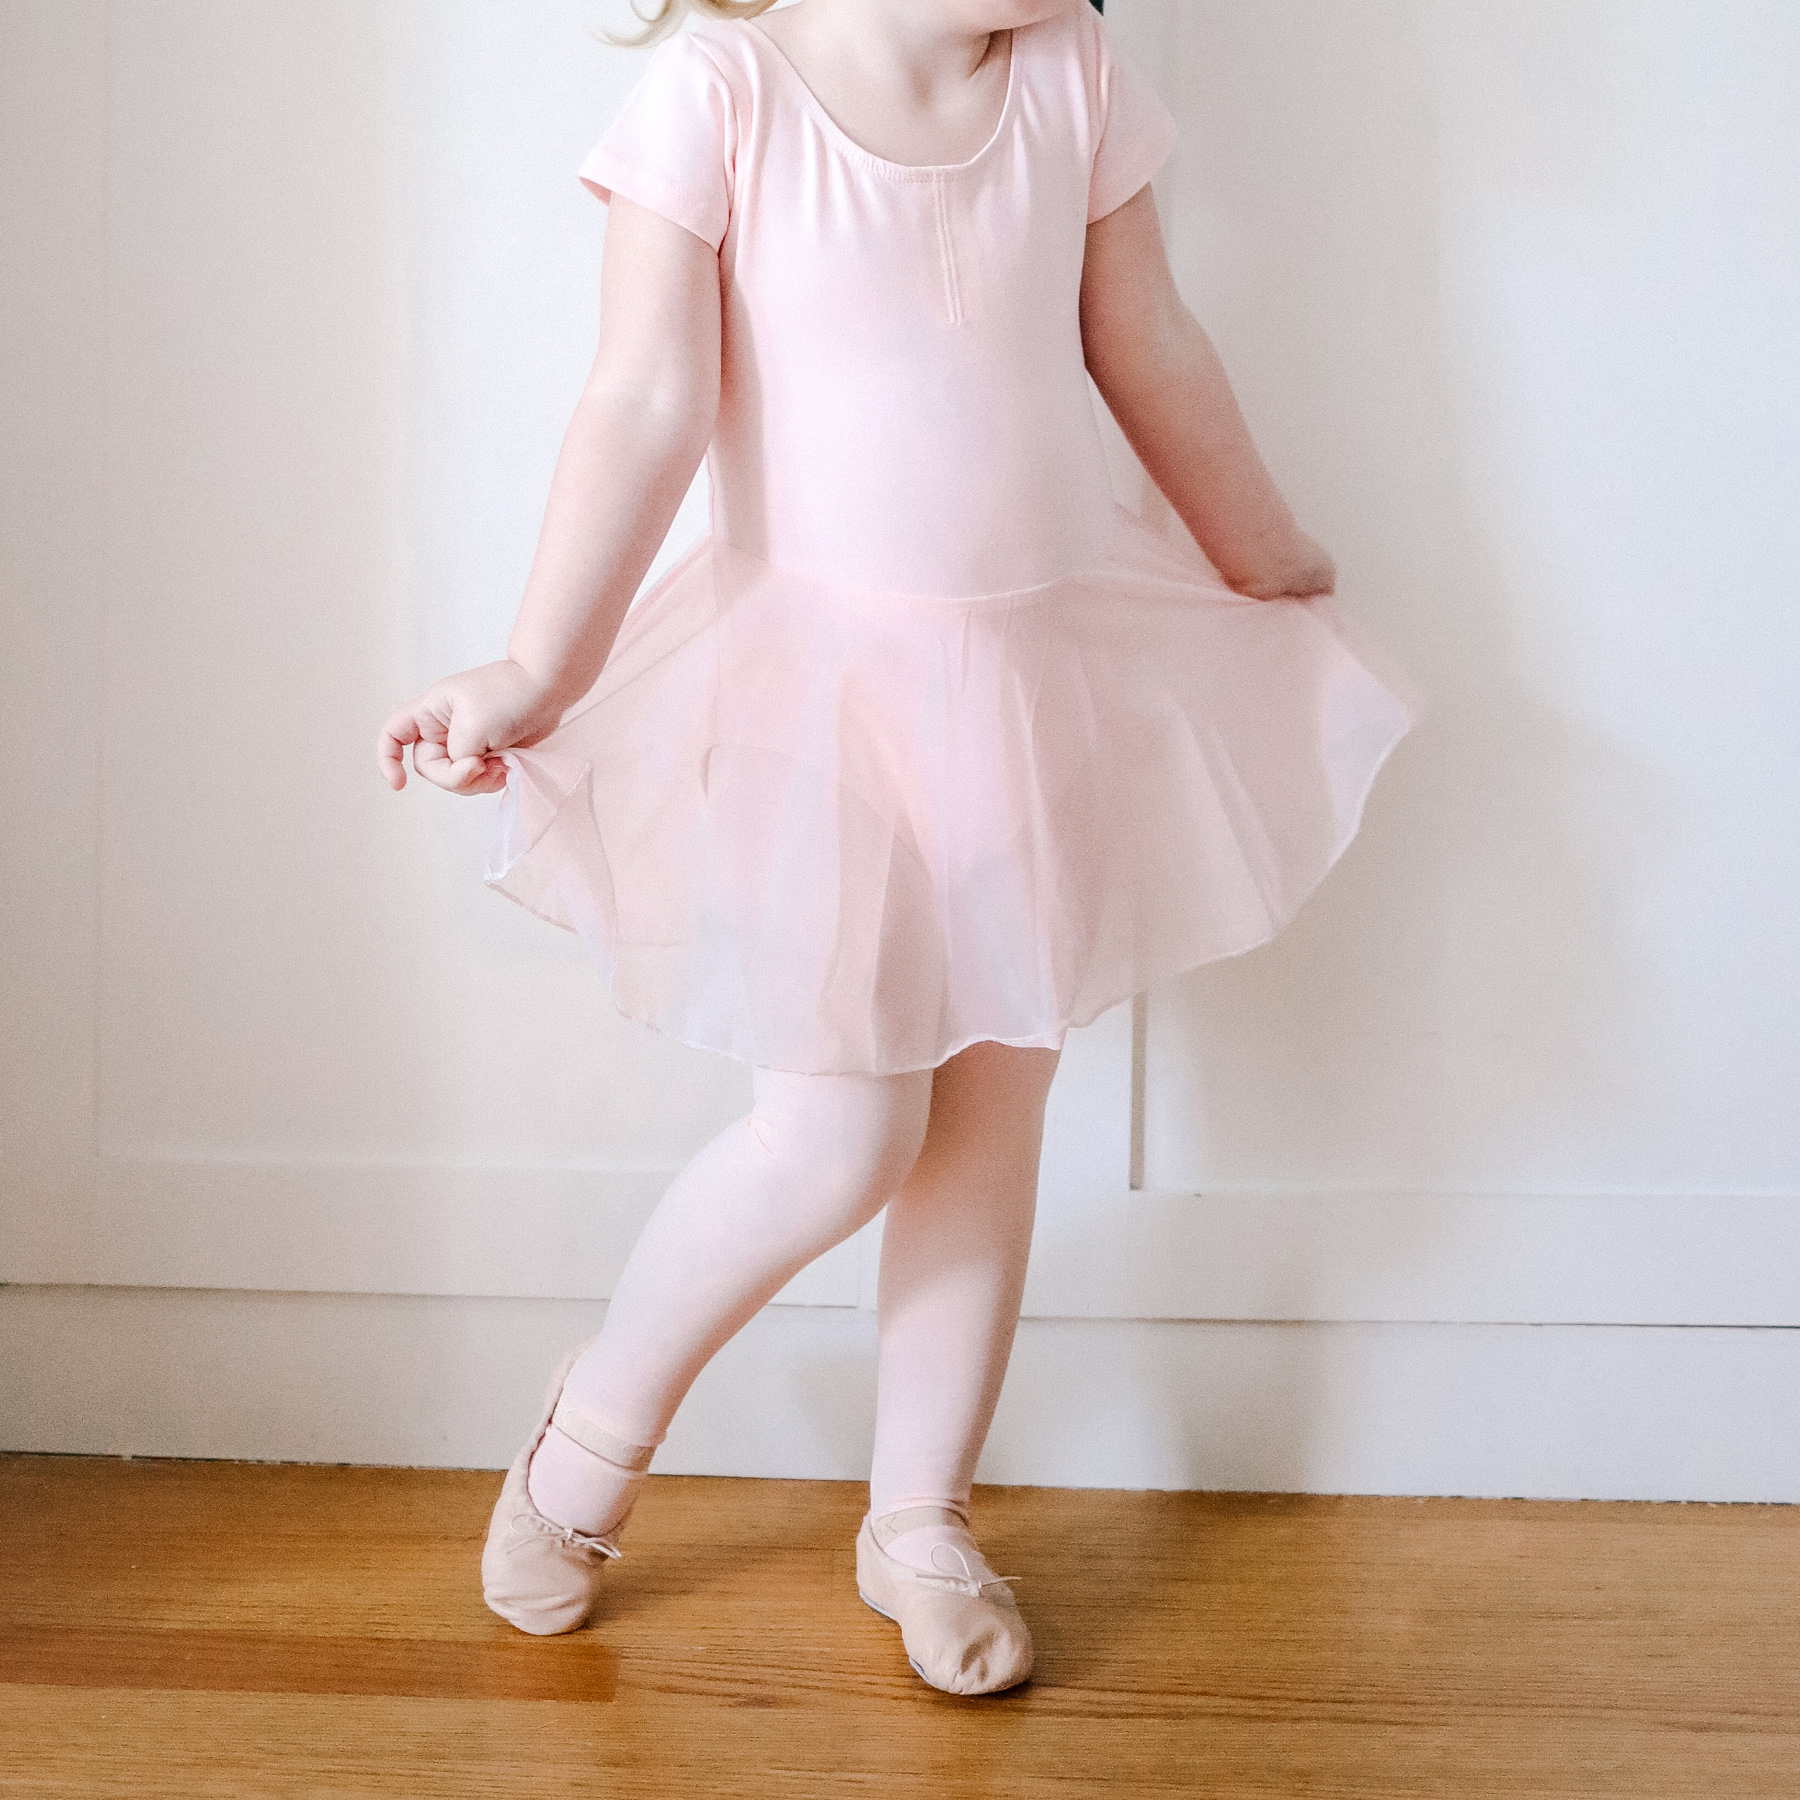 2t ballet outfit